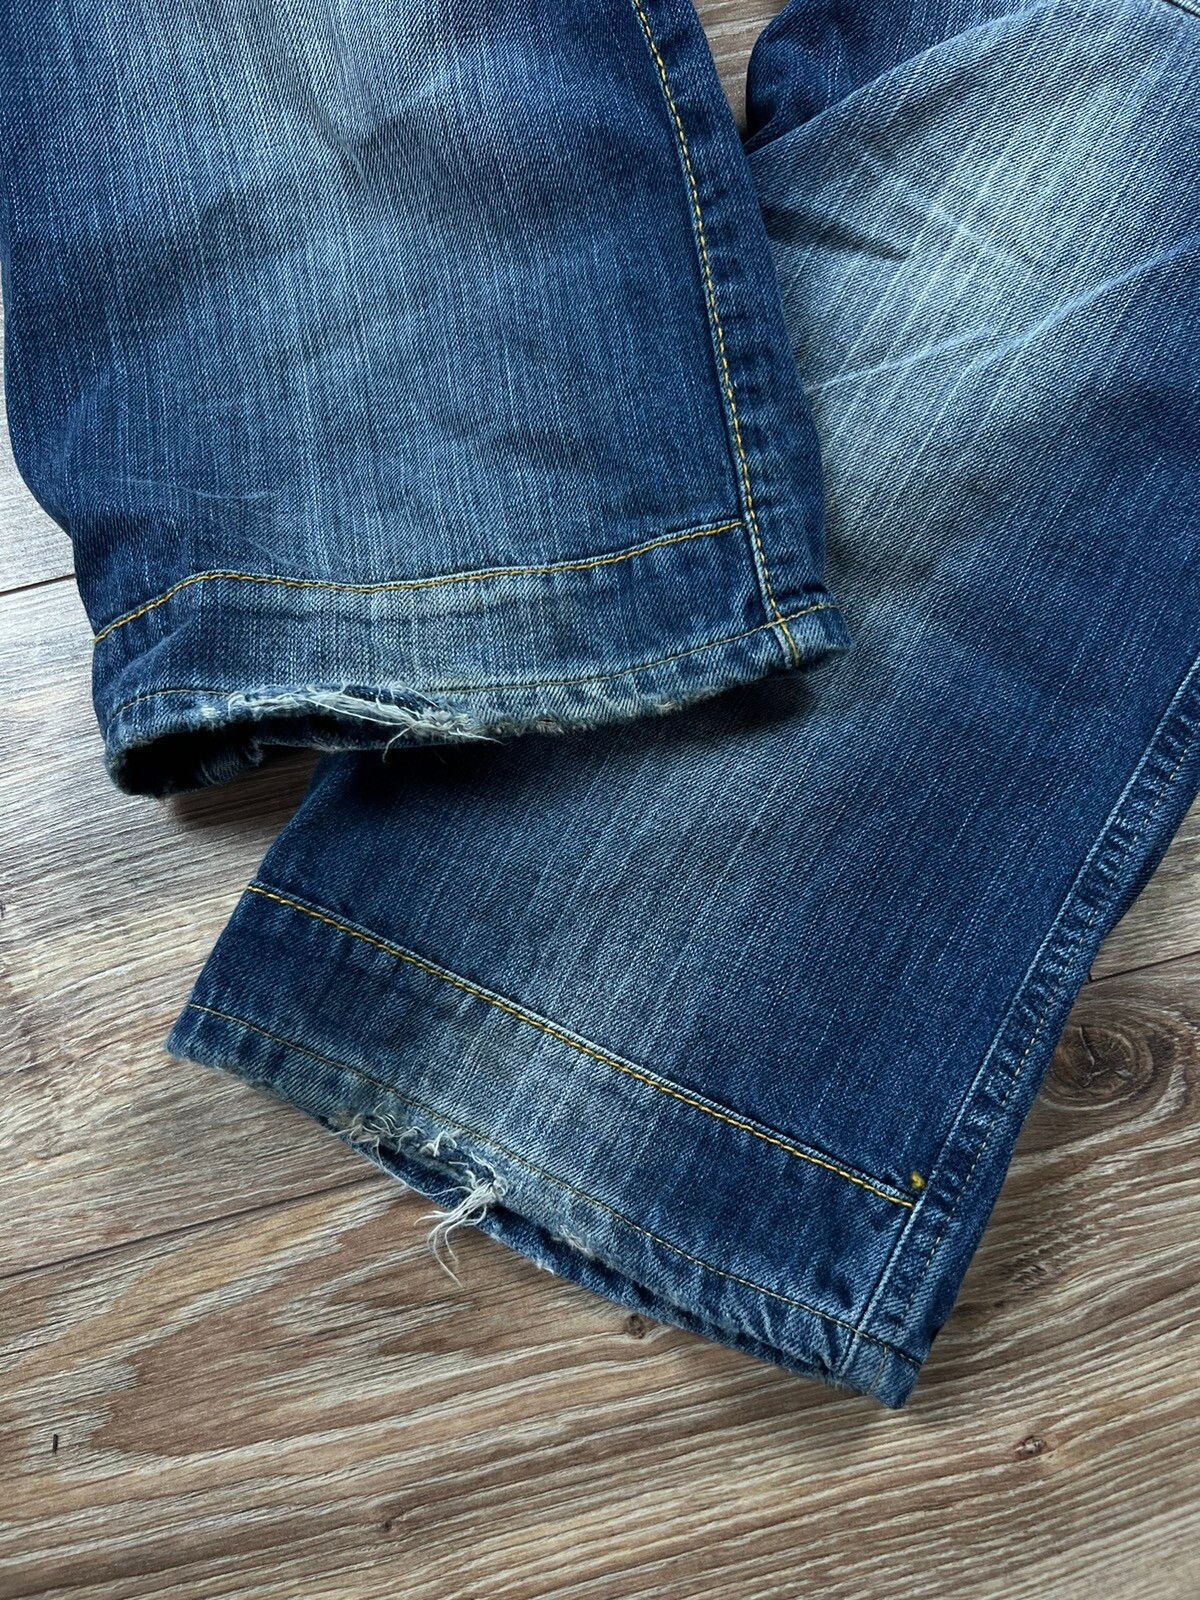 Vintage 💫 90’S G-STAR RAW VINTAGE DOUBLE KNEE OPIUM WASHED JEANS Size US 30 / EU 46 - 6 Thumbnail